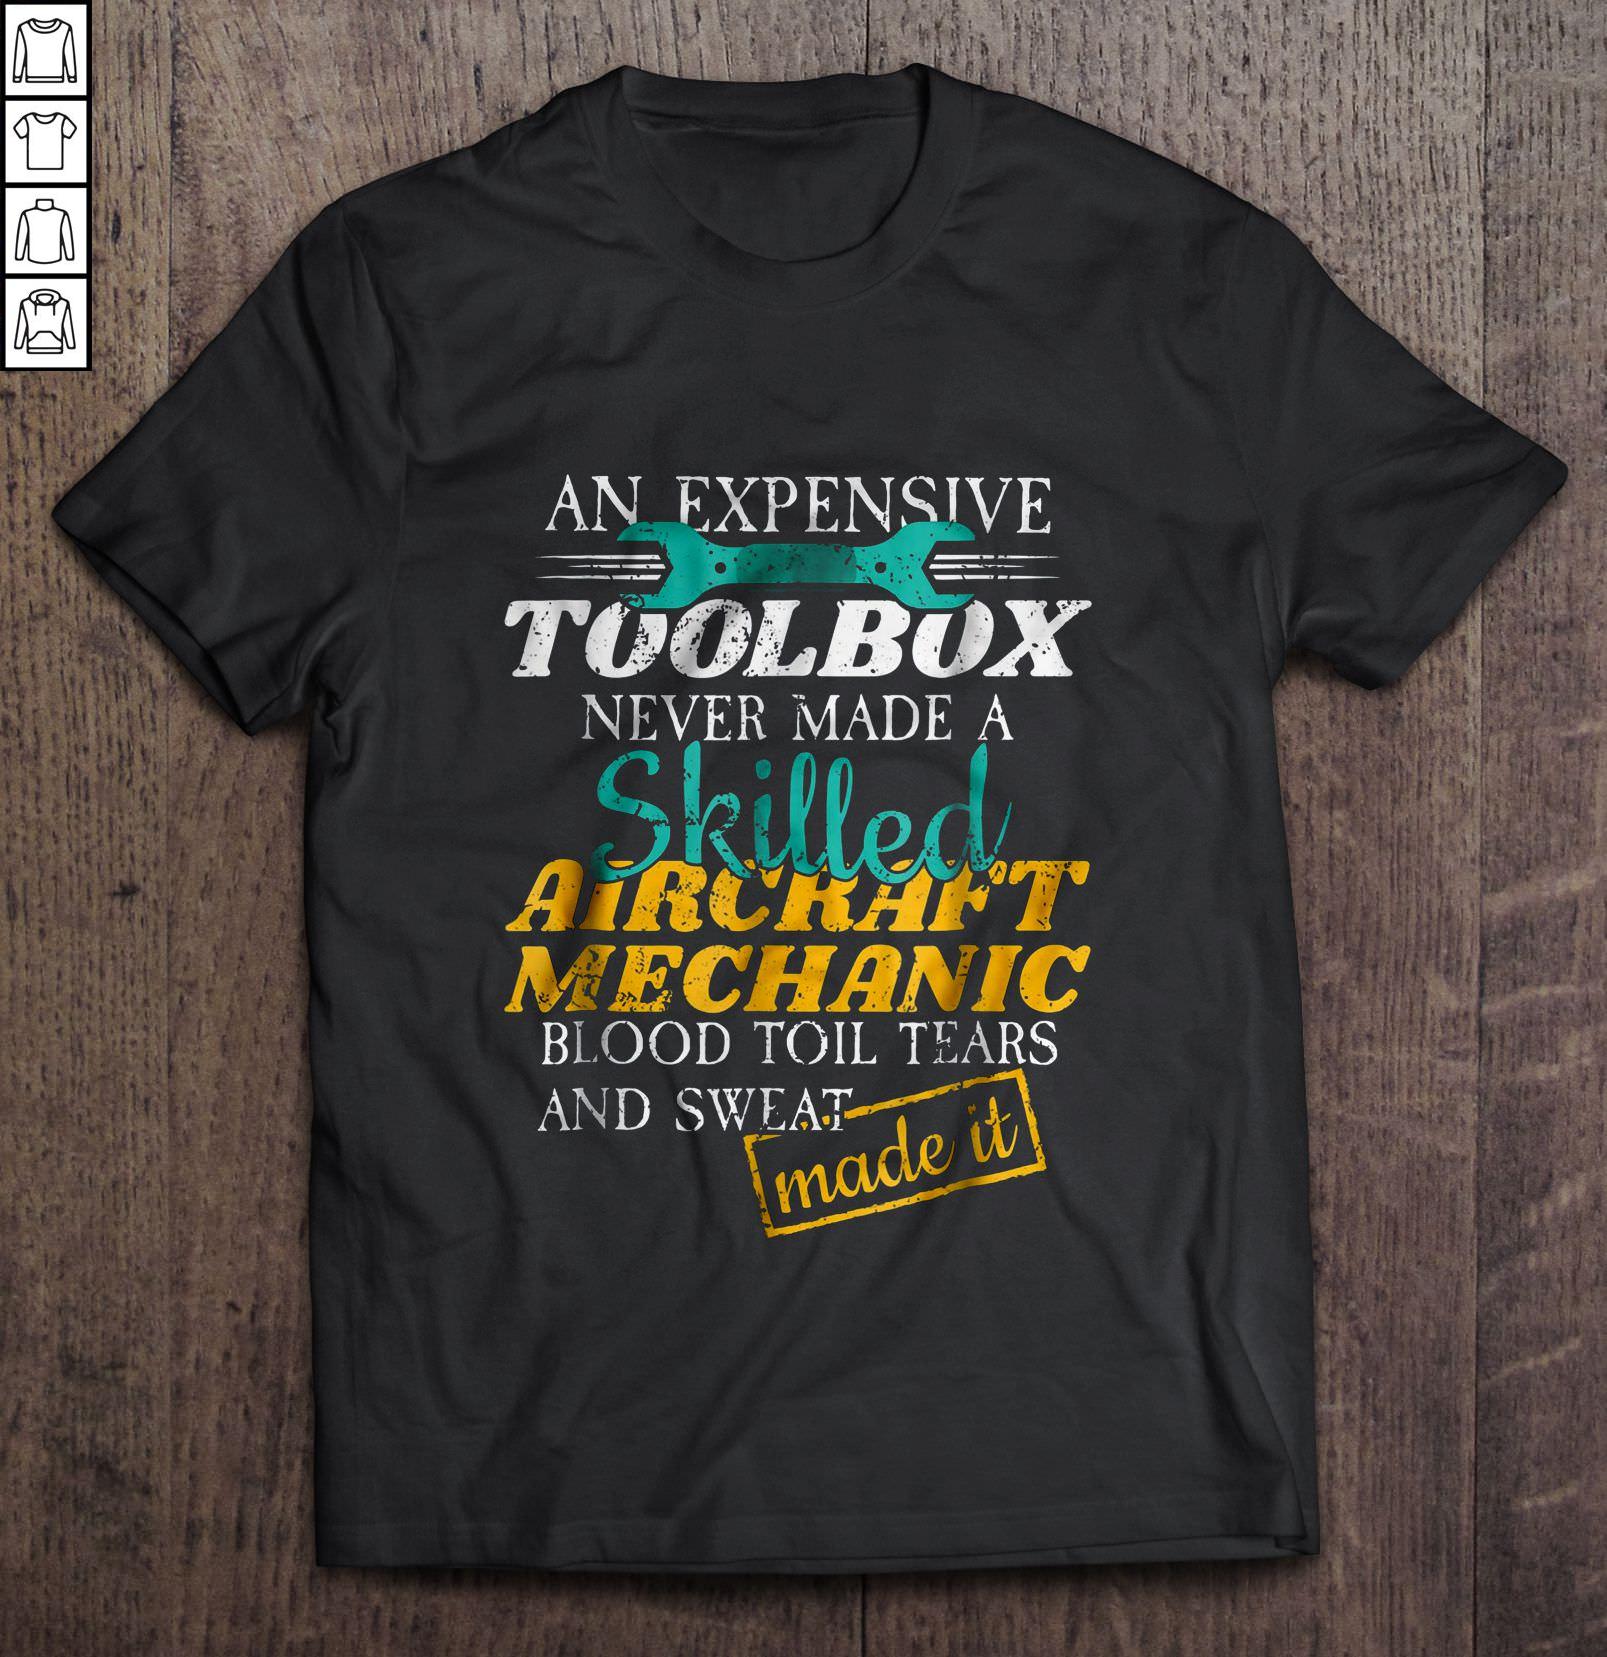 An Expensive Toolbox Never Made A Skilled Aircraft Mechanic Blood Toil Tears And Sweat Made It TShirt